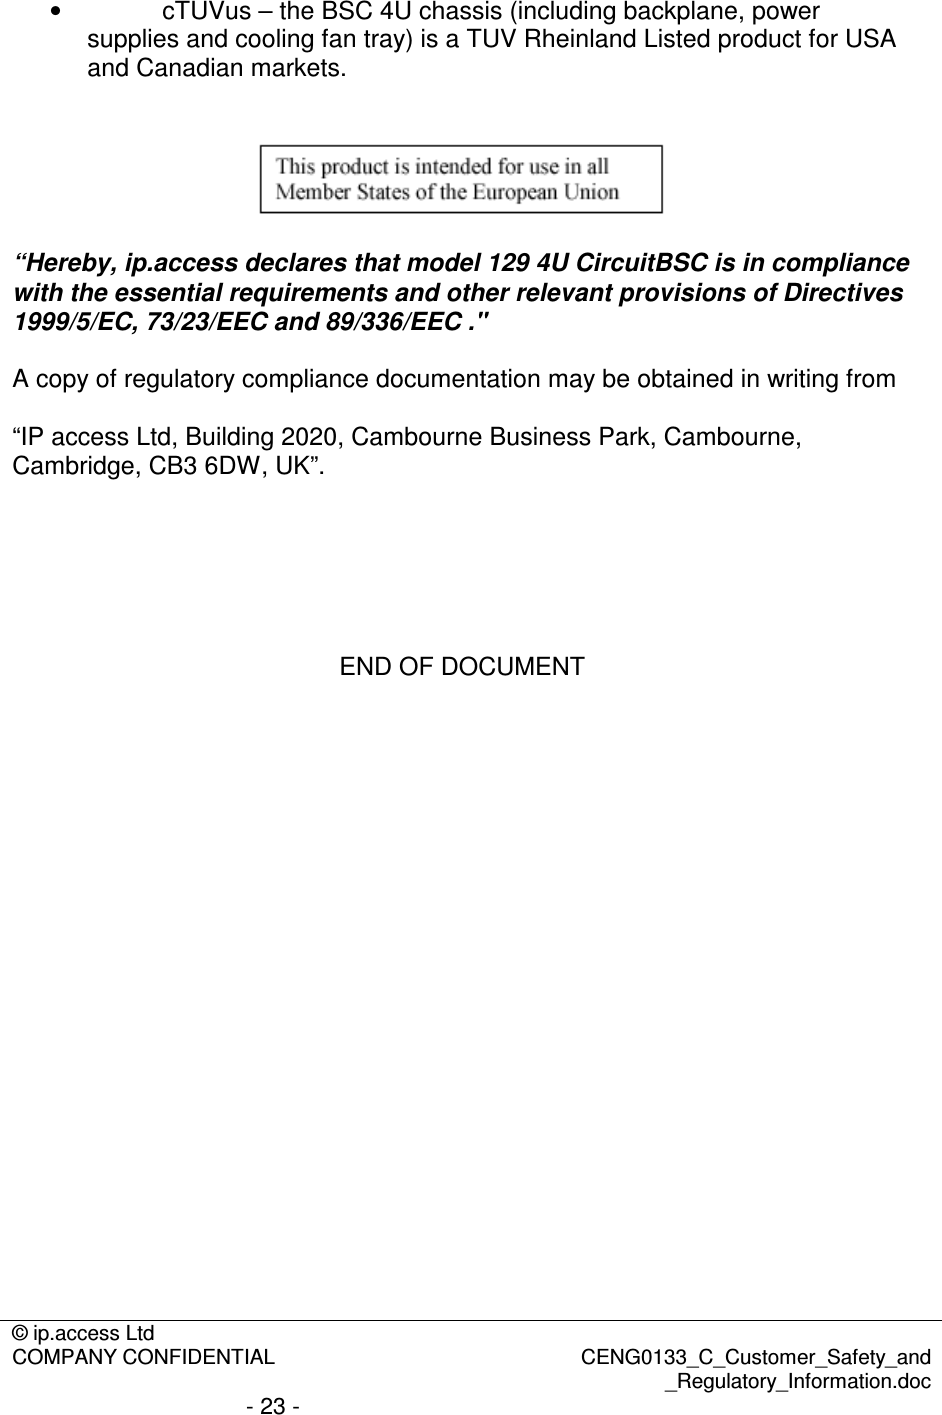 © ip.access Ltd  COMPANY CONFIDENTIAL  CENG0133_C_Customer_Safety_and _Regulatory_Information.doc - 23 -  •  cTUVus – the BSC 4U chassis (including backplane, power supplies and cooling fan tray) is a TUV Rheinland Listed product for USA and Canadian markets.     “Hereby, ip.access declares that model 129 4U CircuitBSC is in compliance with the essential requirements and other relevant provisions of Directives 1999/5/EC, 73/23/EEC and 89/336/EEC .&quot;  A copy of regulatory compliance documentation may be obtained in writing from  “IP access Ltd, Building 2020, Cambourne Business Park, Cambourne, Cambridge, CB3 6DW, UK”.       END OF DOCUMENT 